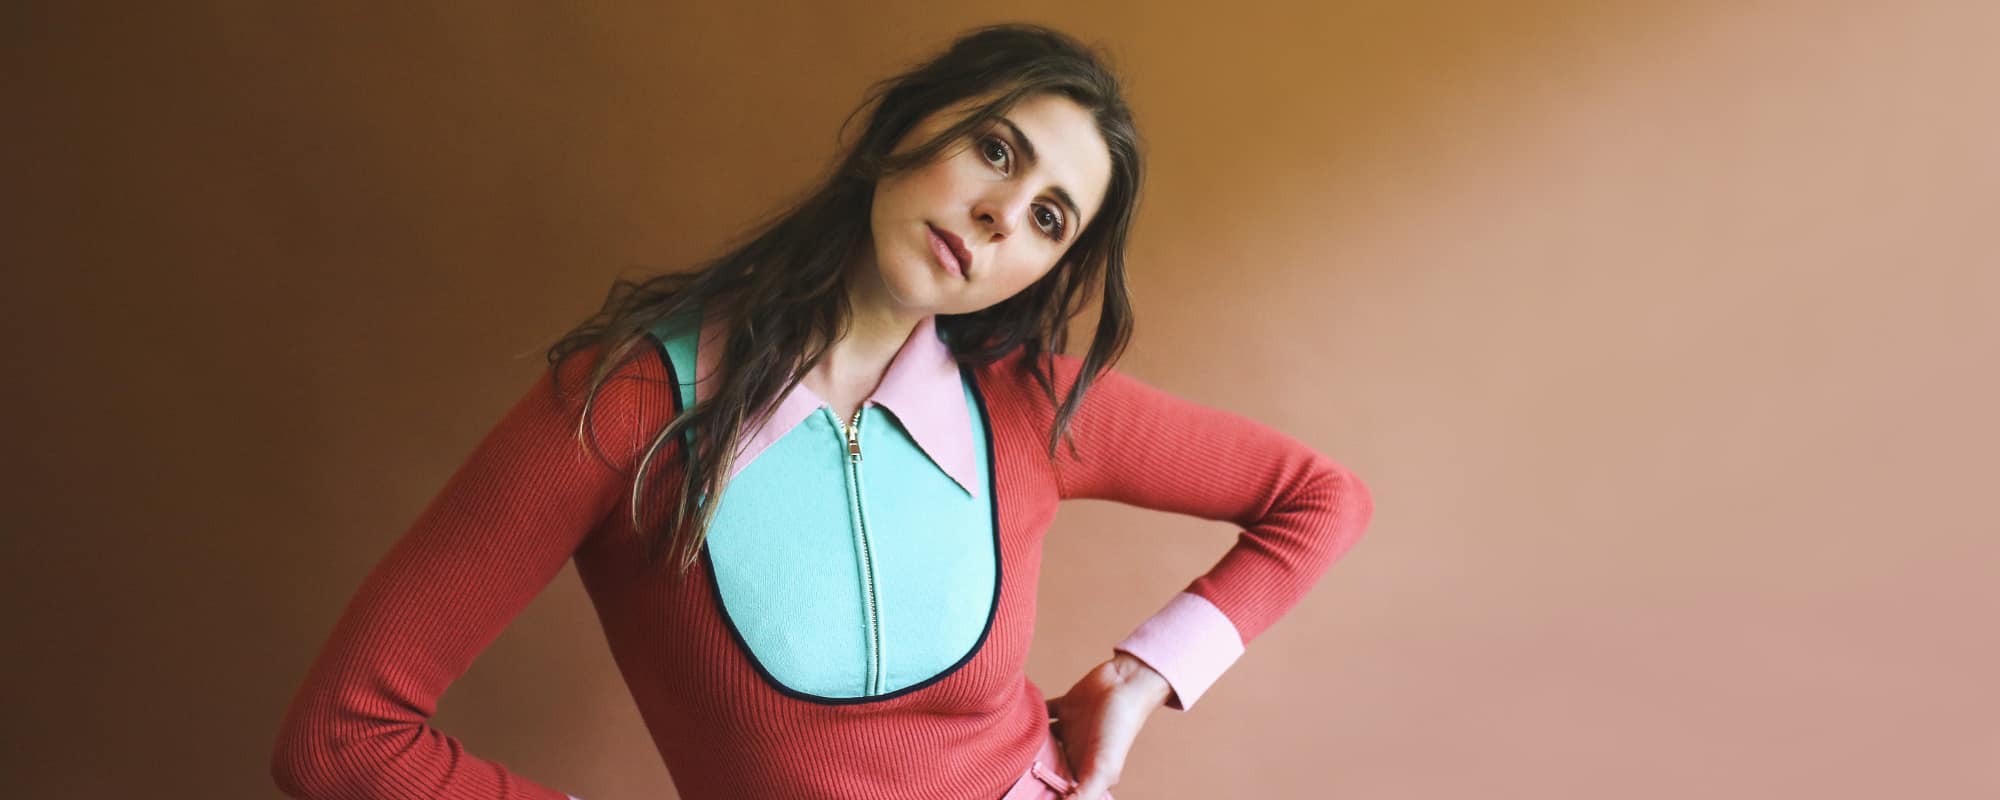 With a New Album in Hand, Jillette Johnson Finds Herself Commanding New Confidence